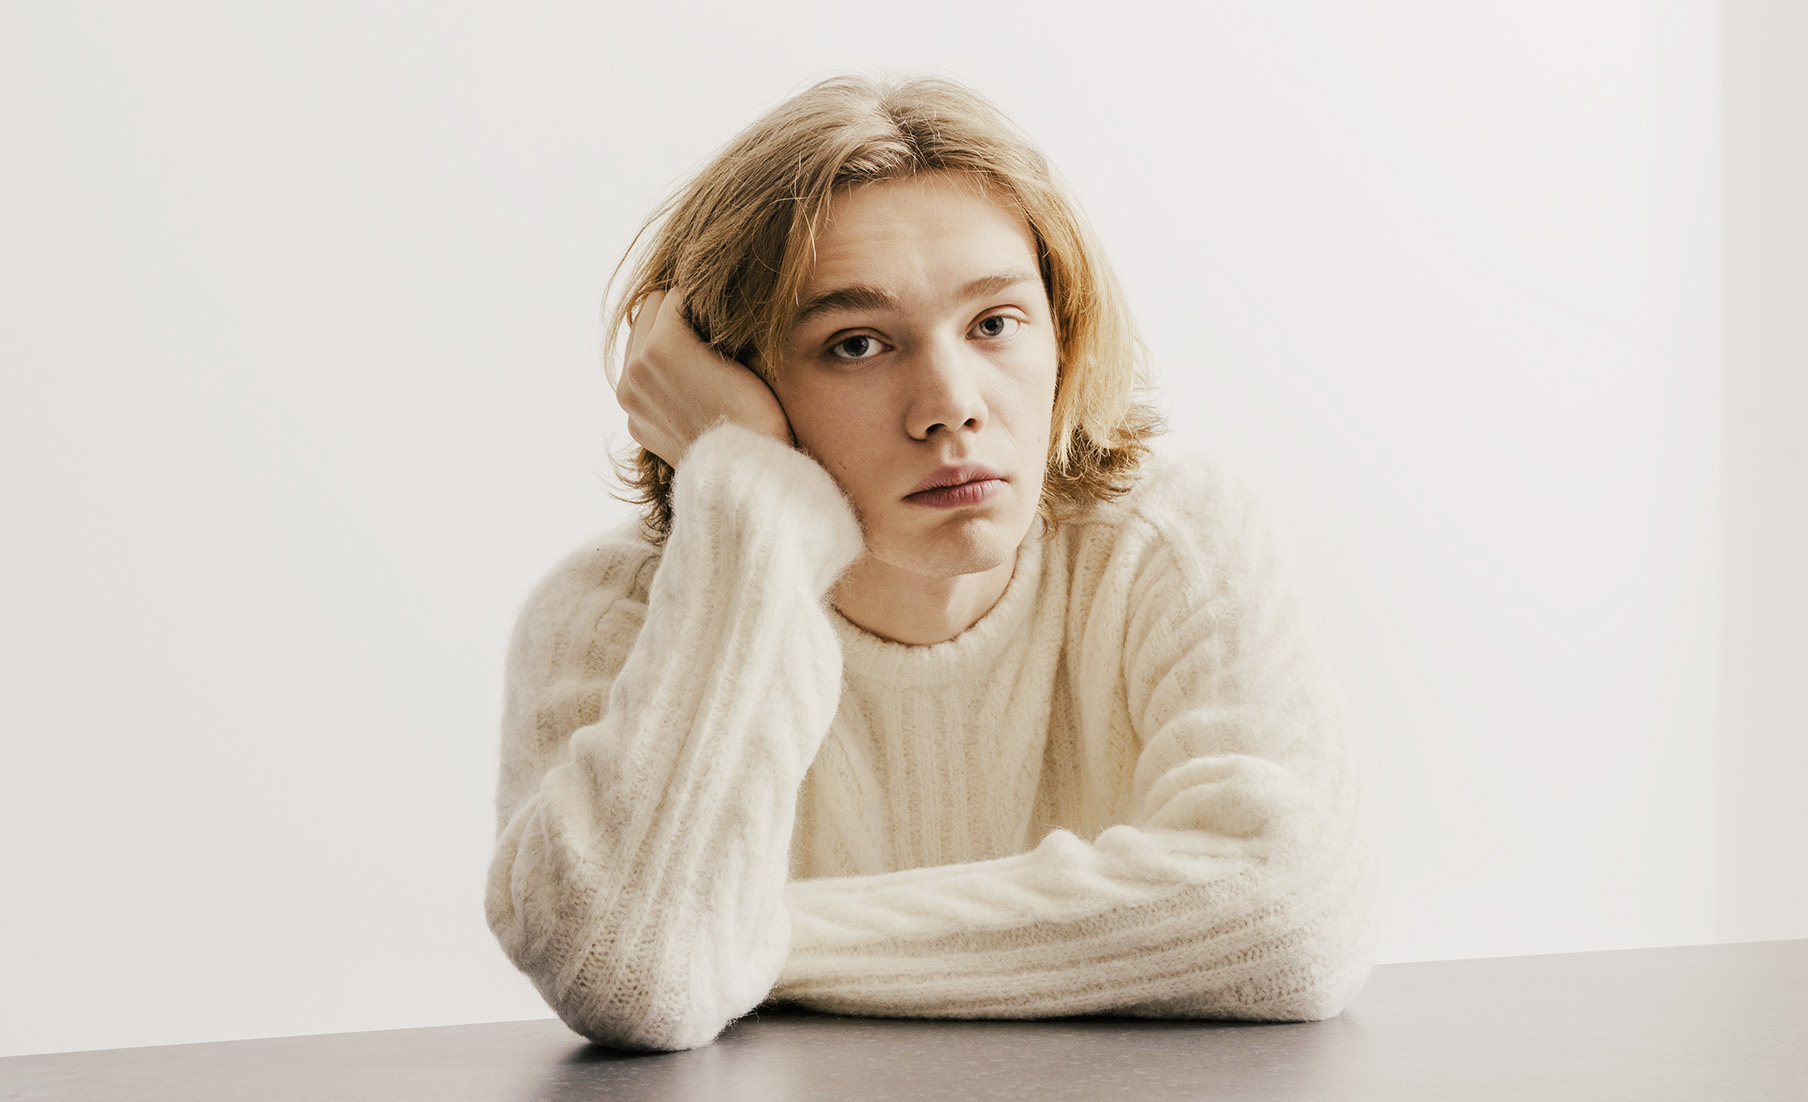 Charlie Plummer Shirtless And Sexy Pics & Vids Collection